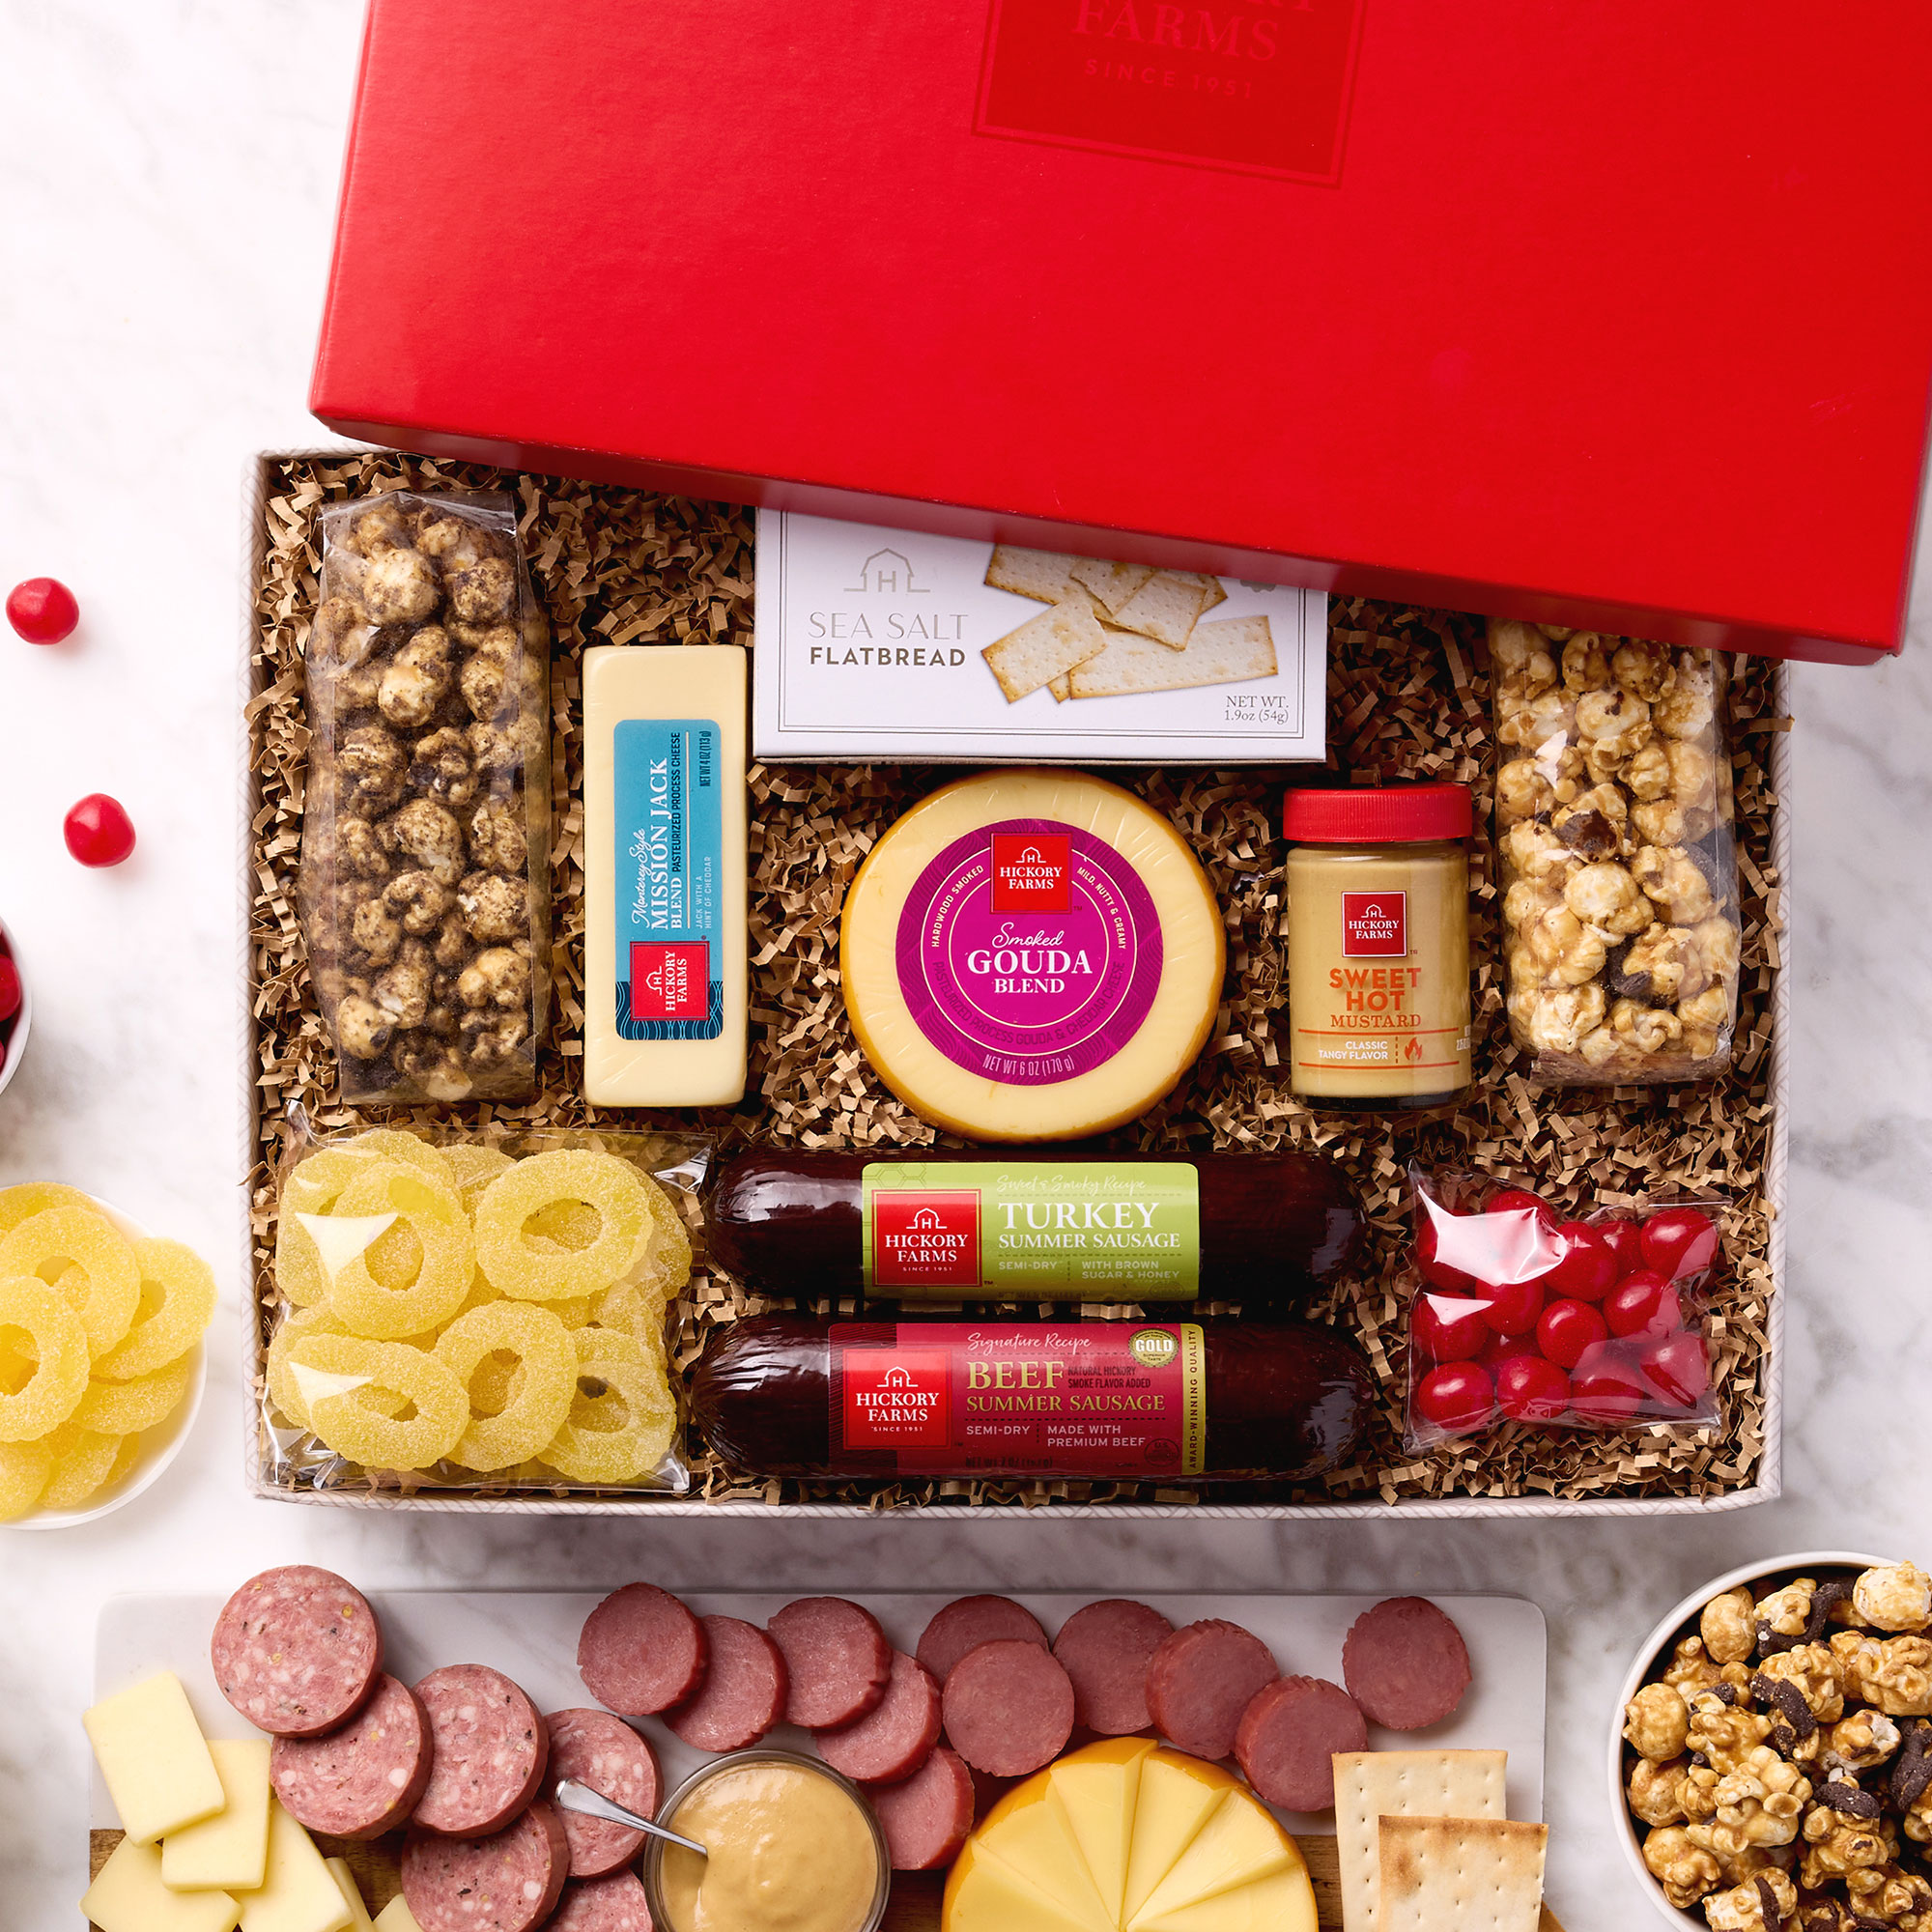 Candy & Popcorn Gift Box with Snacks | Signature Sweets & Snacks Gift Box | Hickory Farms